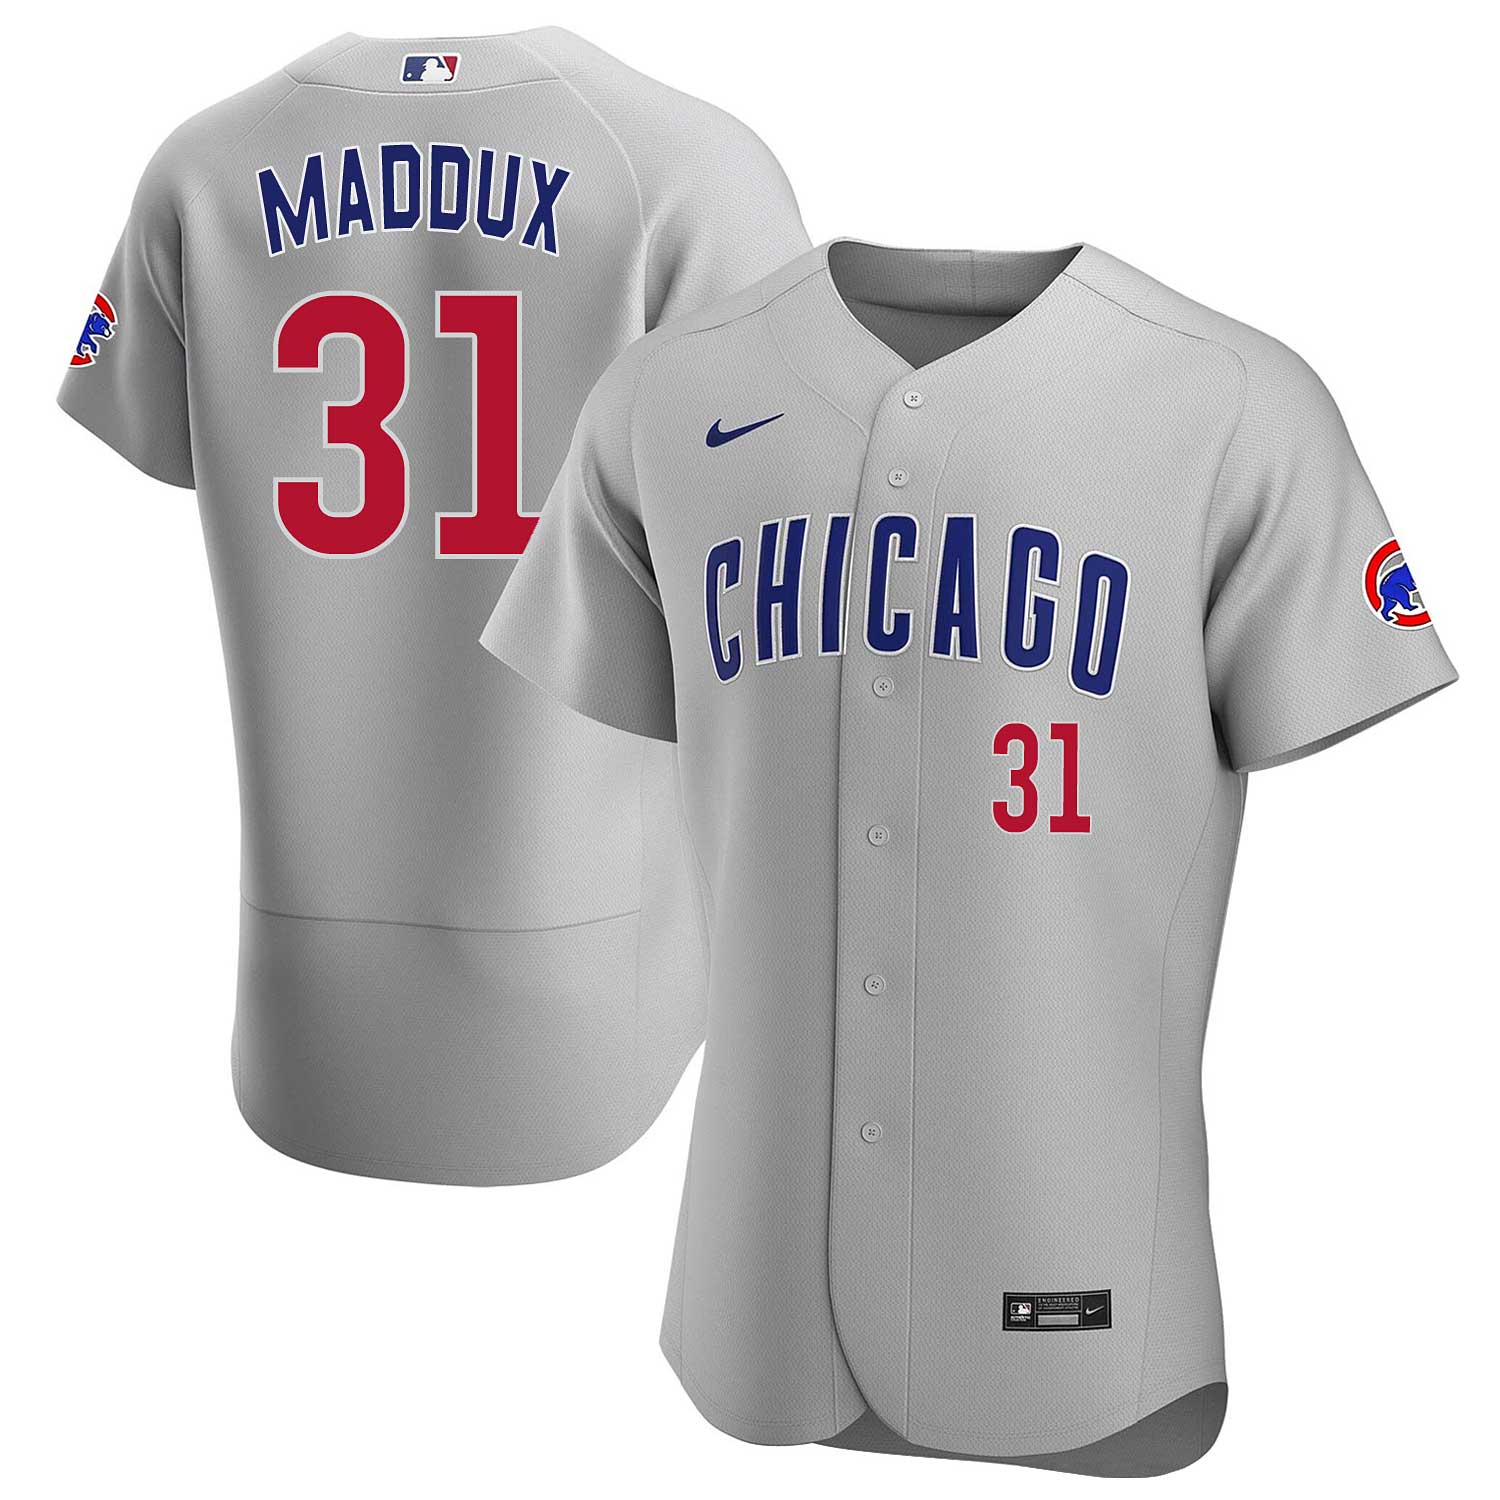 Chicago Cubs Greg Maddux Nike Home Replica Jersey With Authentic Lettering